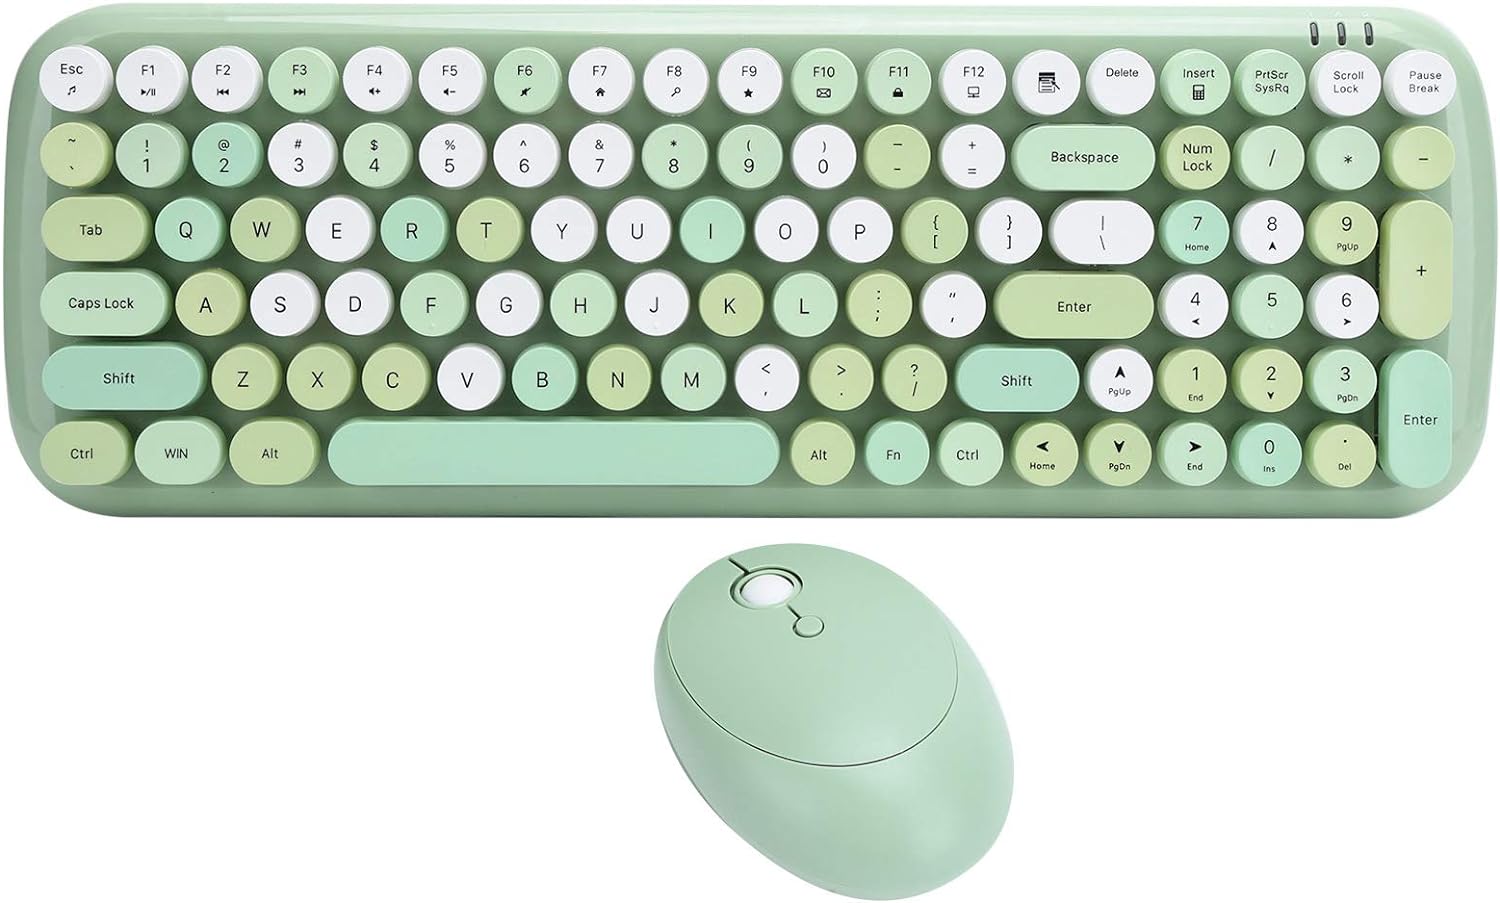 Very cute keyboard, easy to hook up and looks super clean!